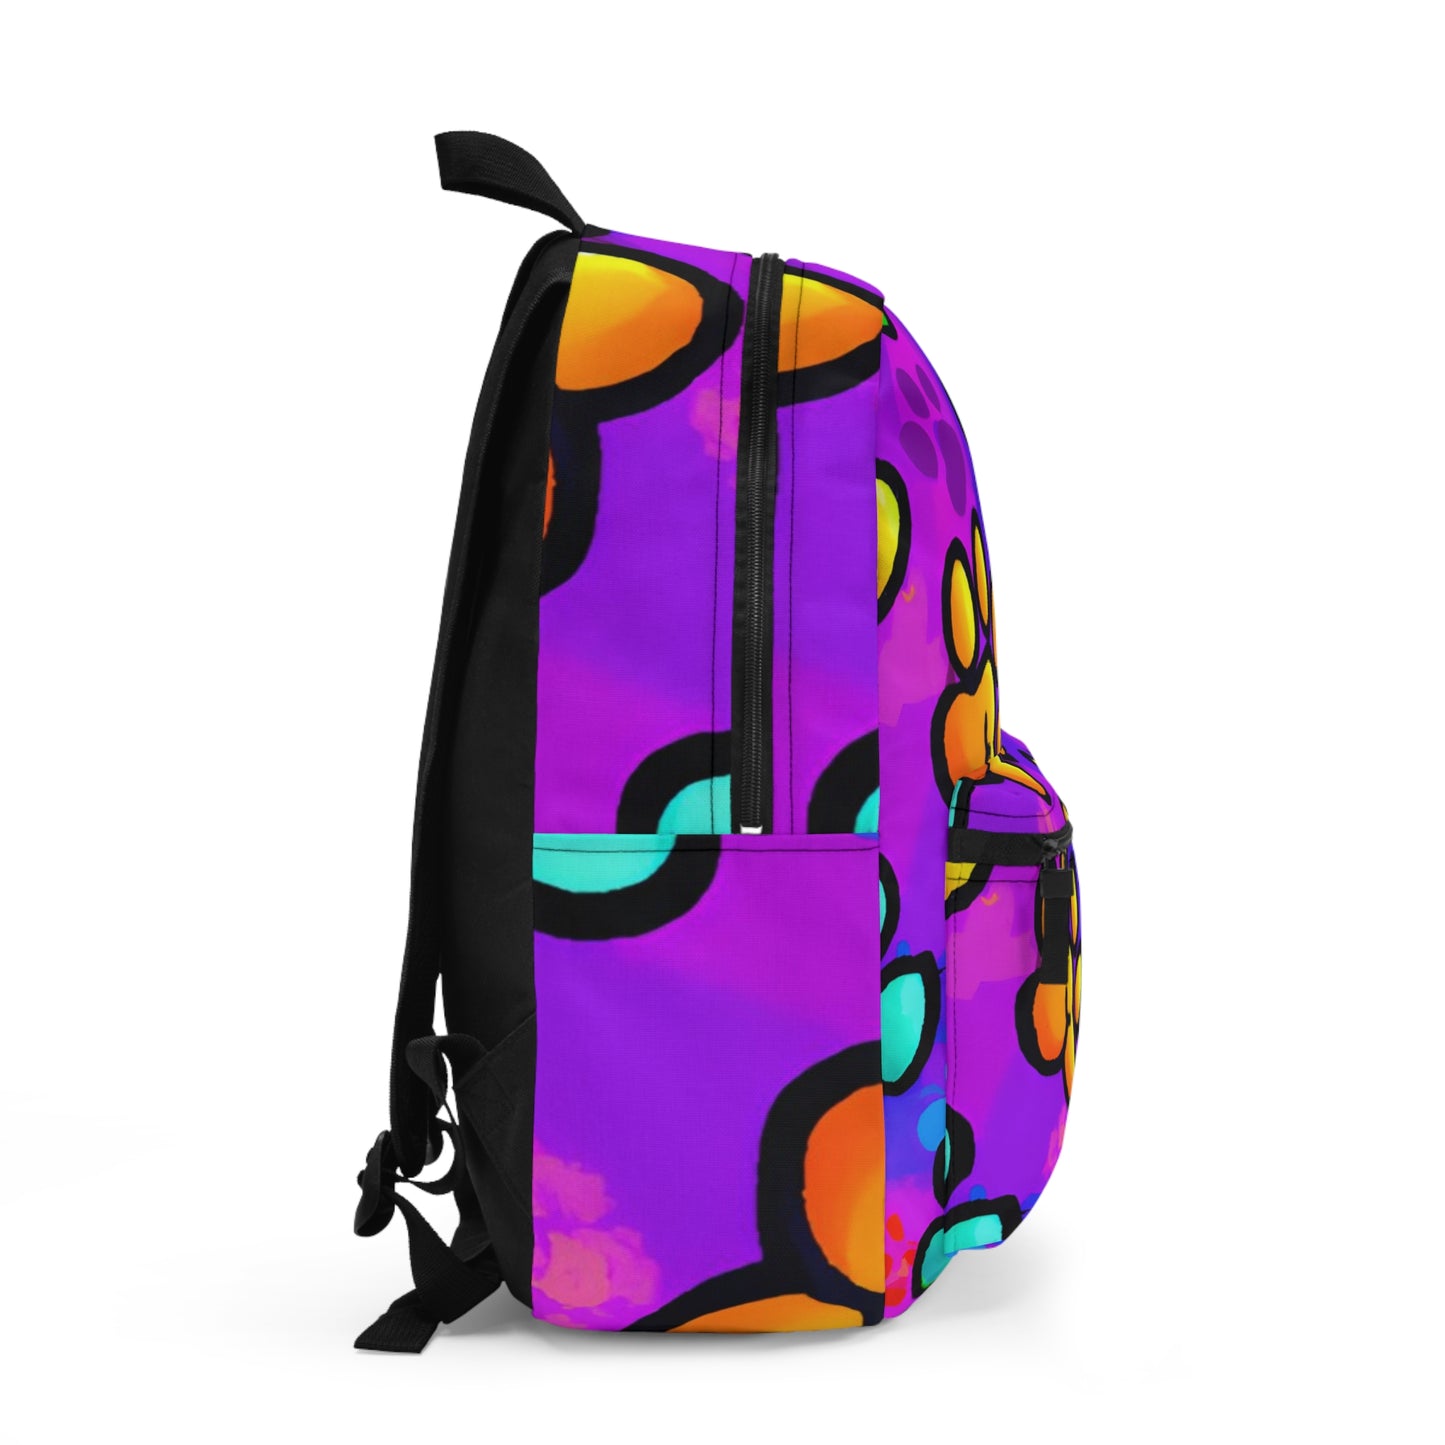 Le Swag du Sixties - Paw Print - Backpack